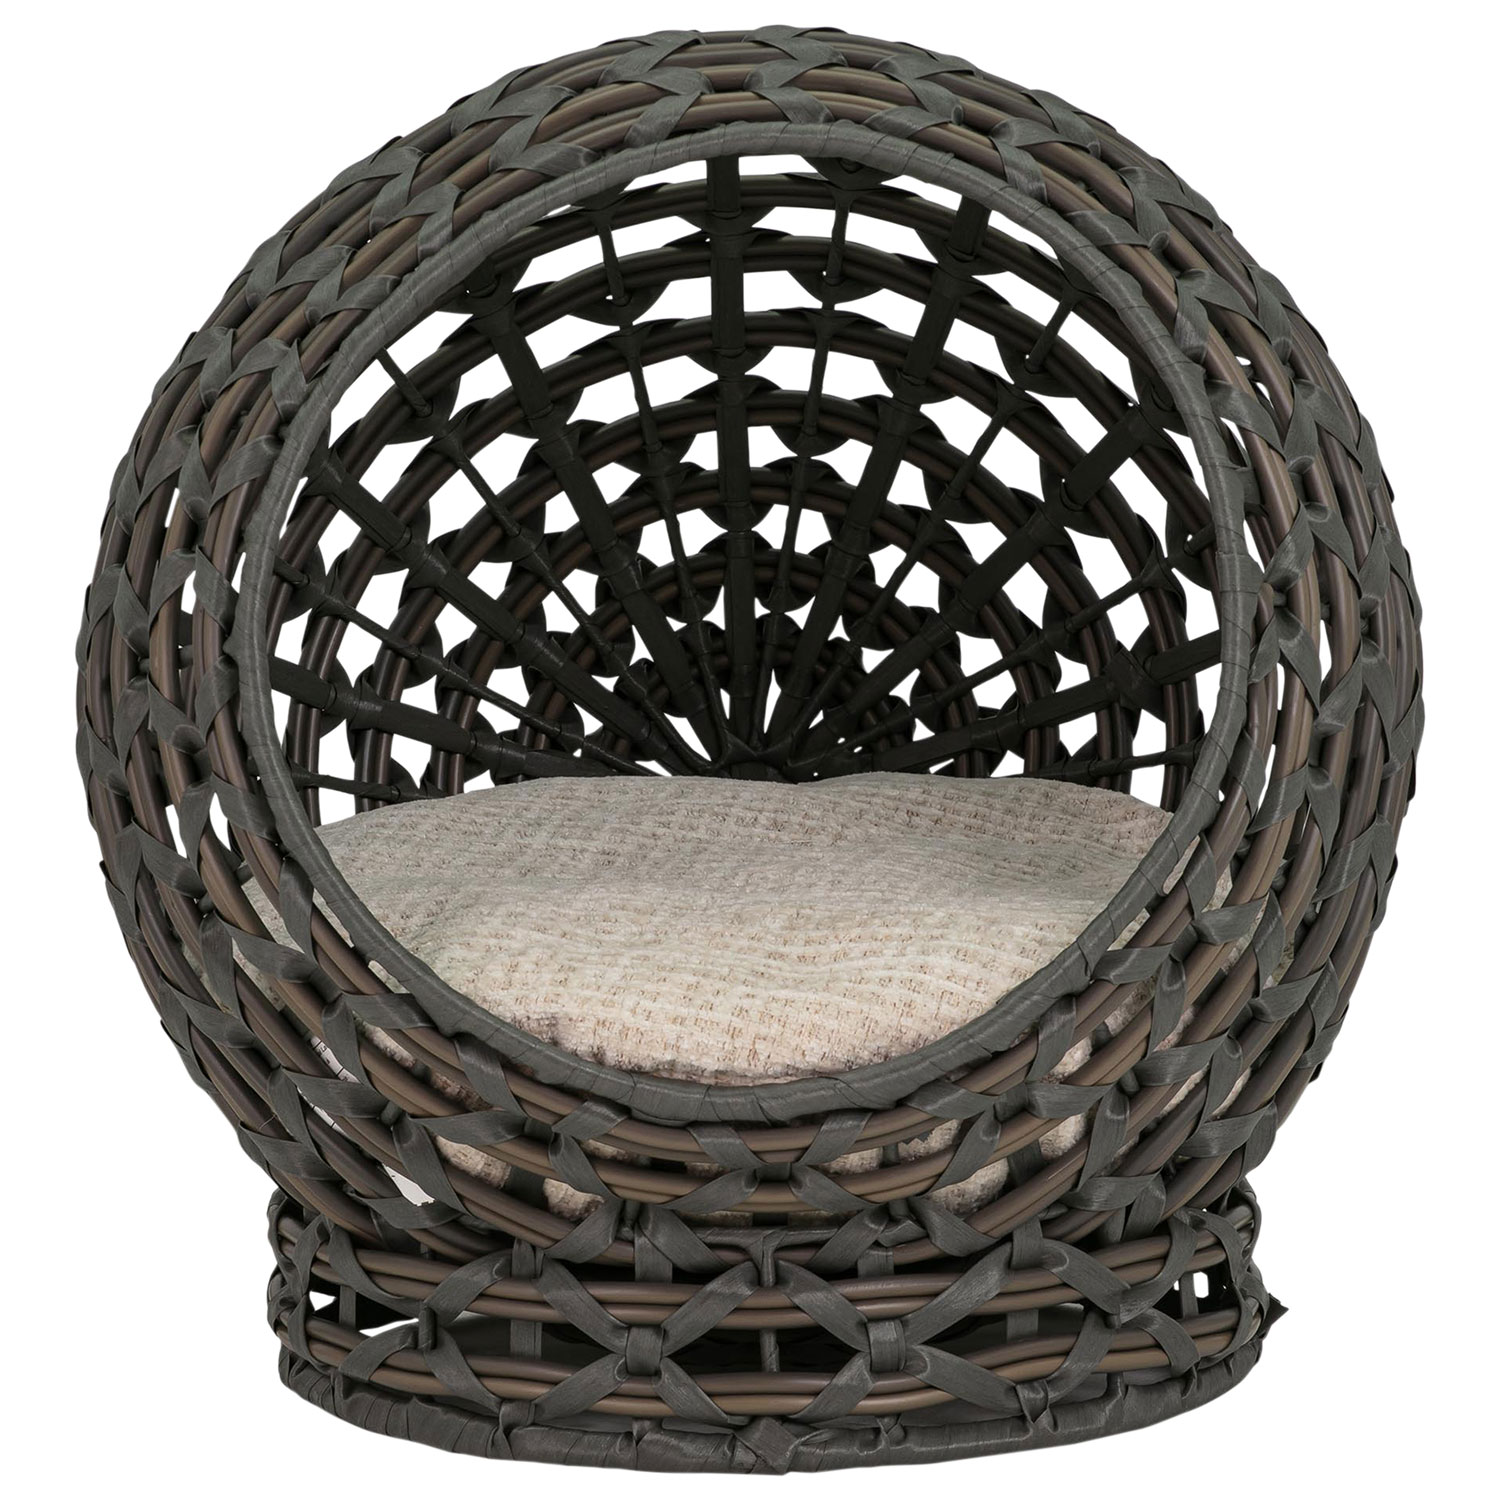 Bowser & Meowser Round Resin Wicker Pet Bed